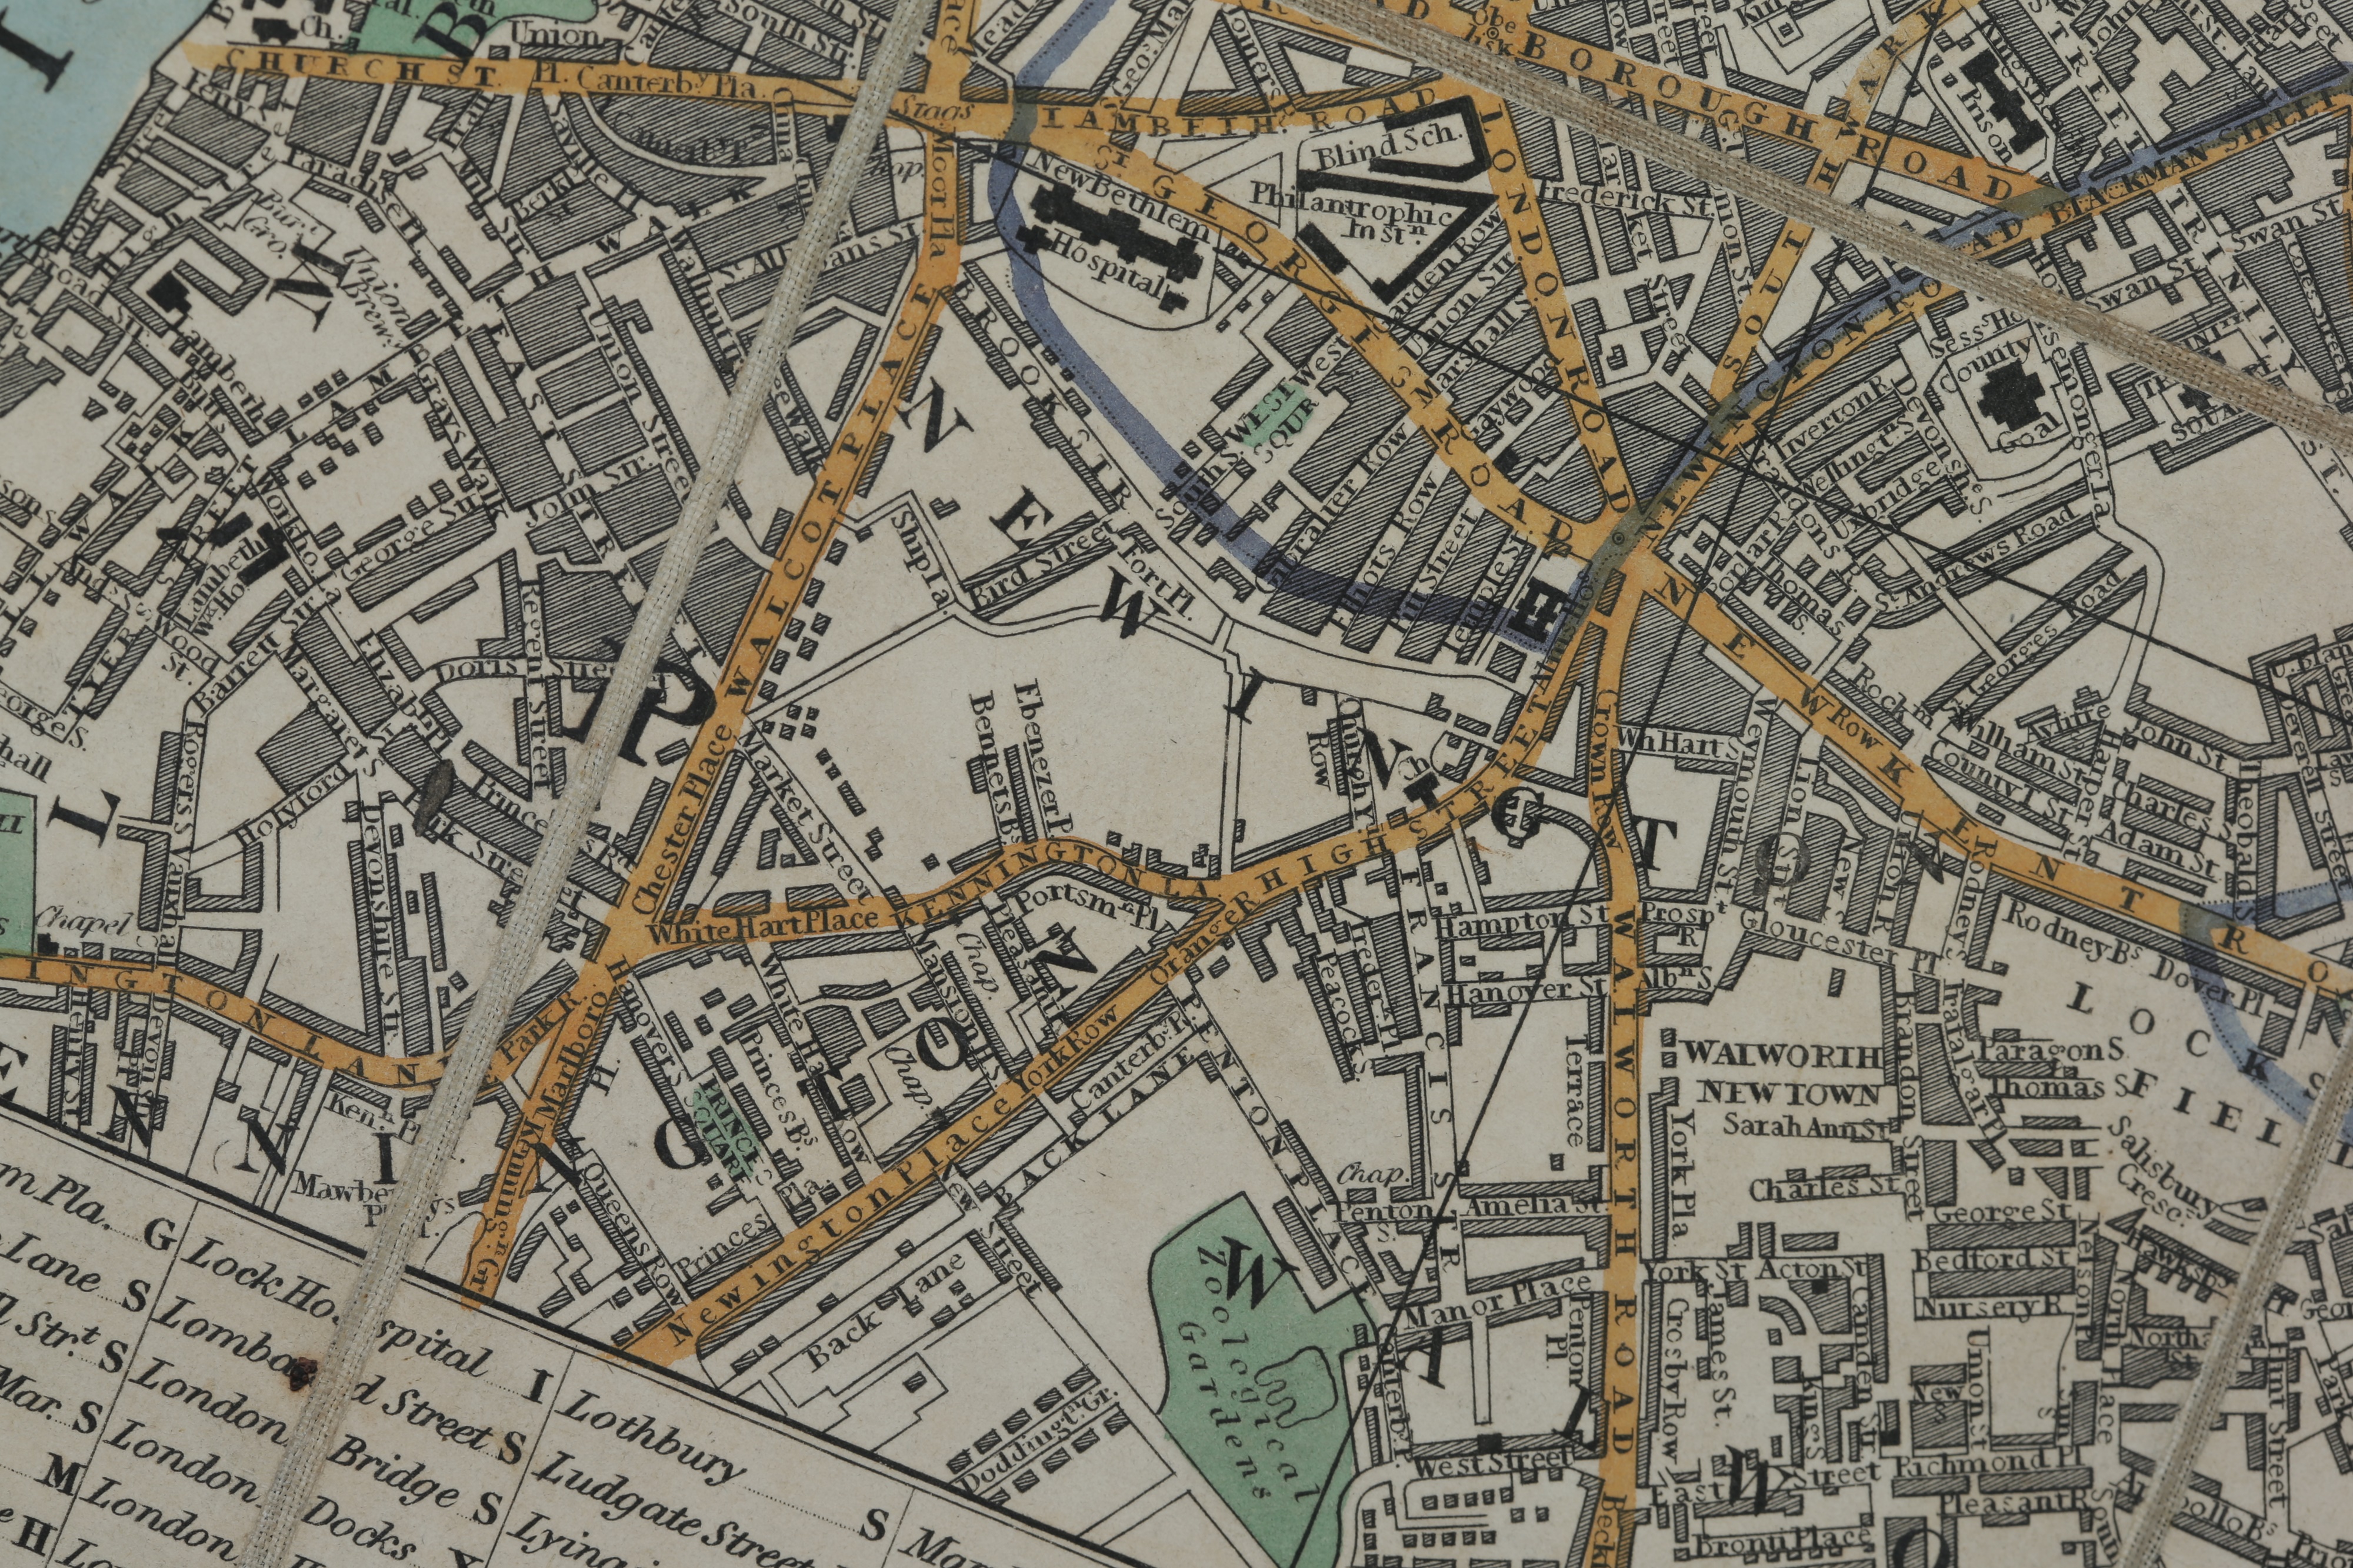 Cruchley's New Plan of London of 1833, - Image 5 of 5